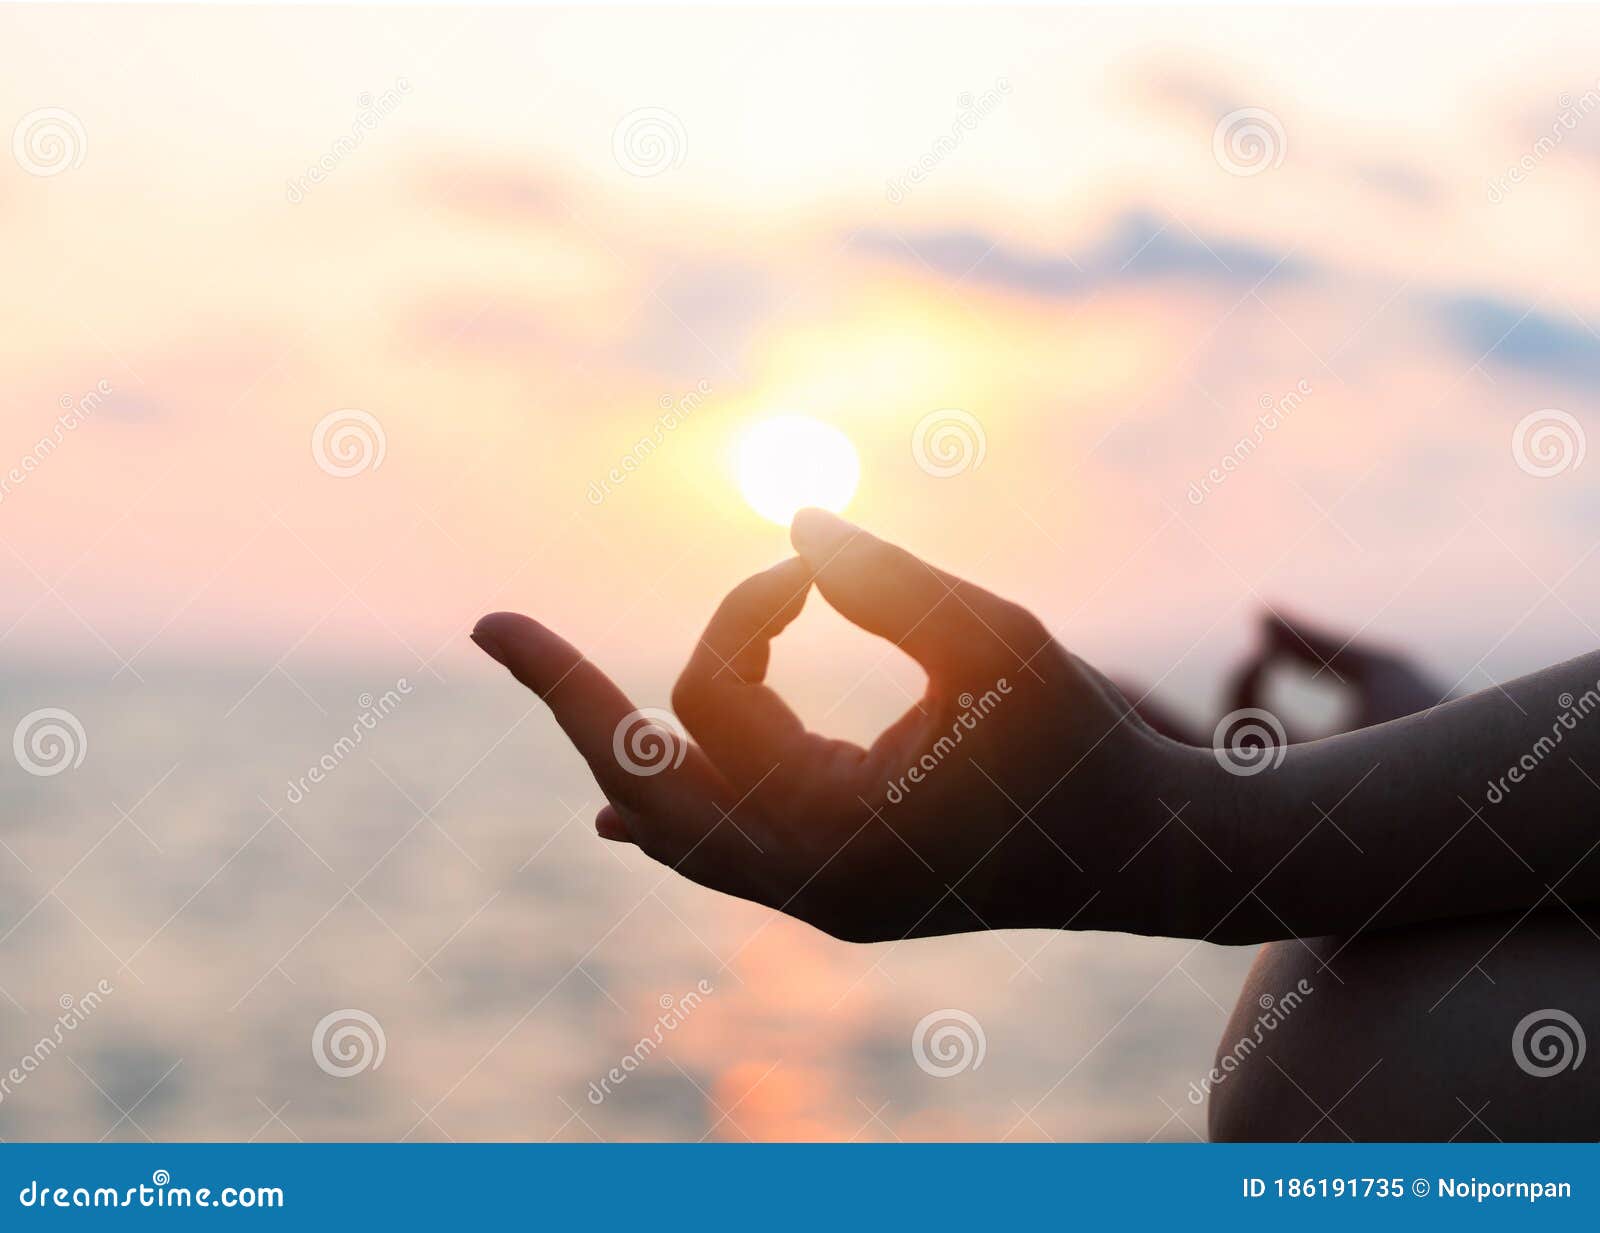 mantra yoga meditation practice with silhouette of woman in lotus pose having peaceful mind relaxation on the beach